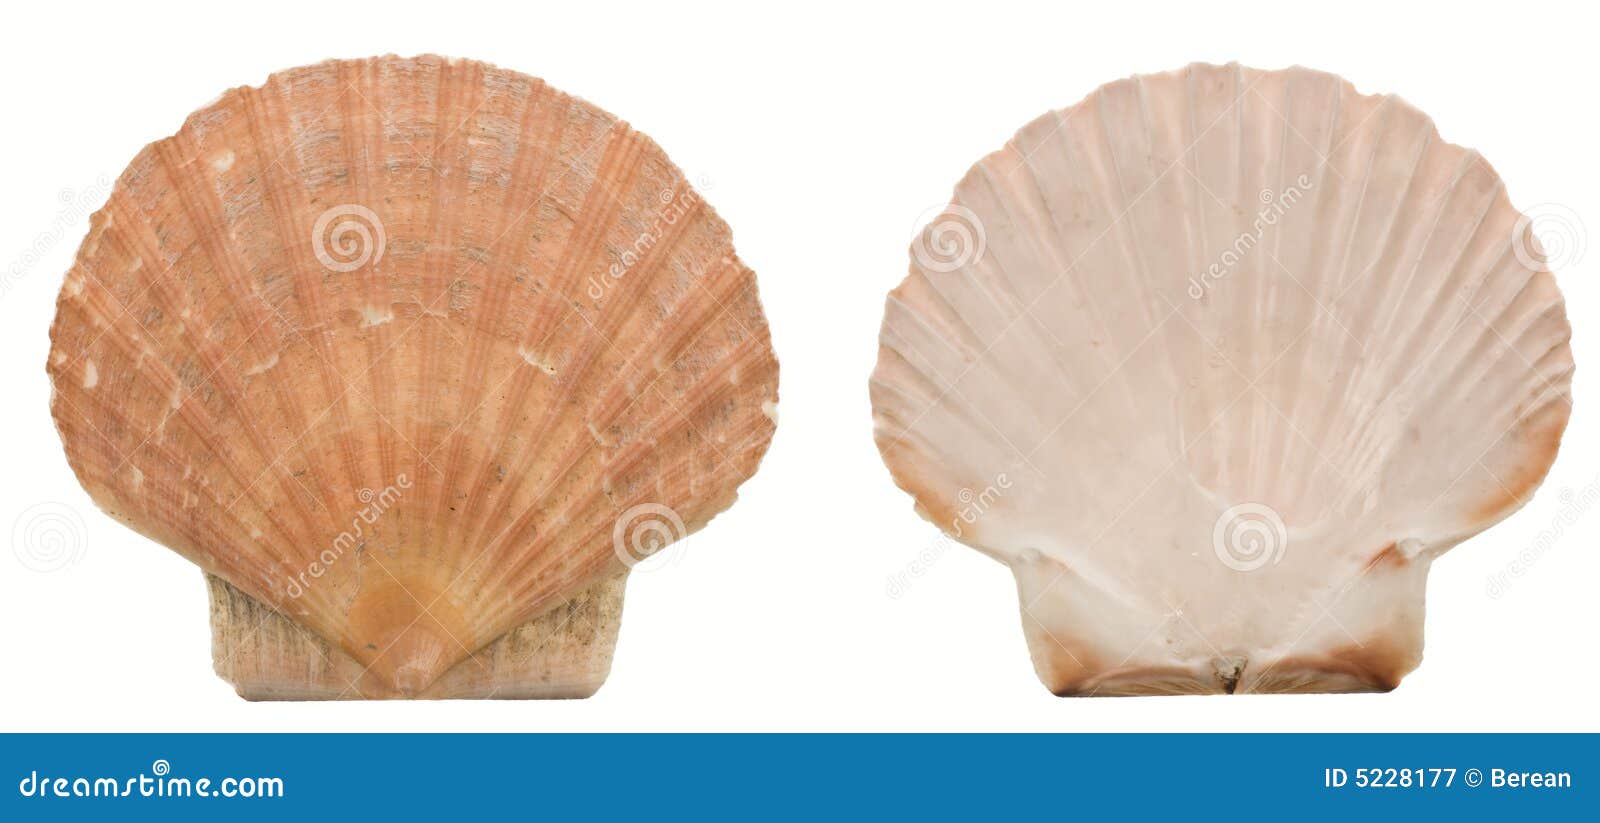 two sides of a scallop shell